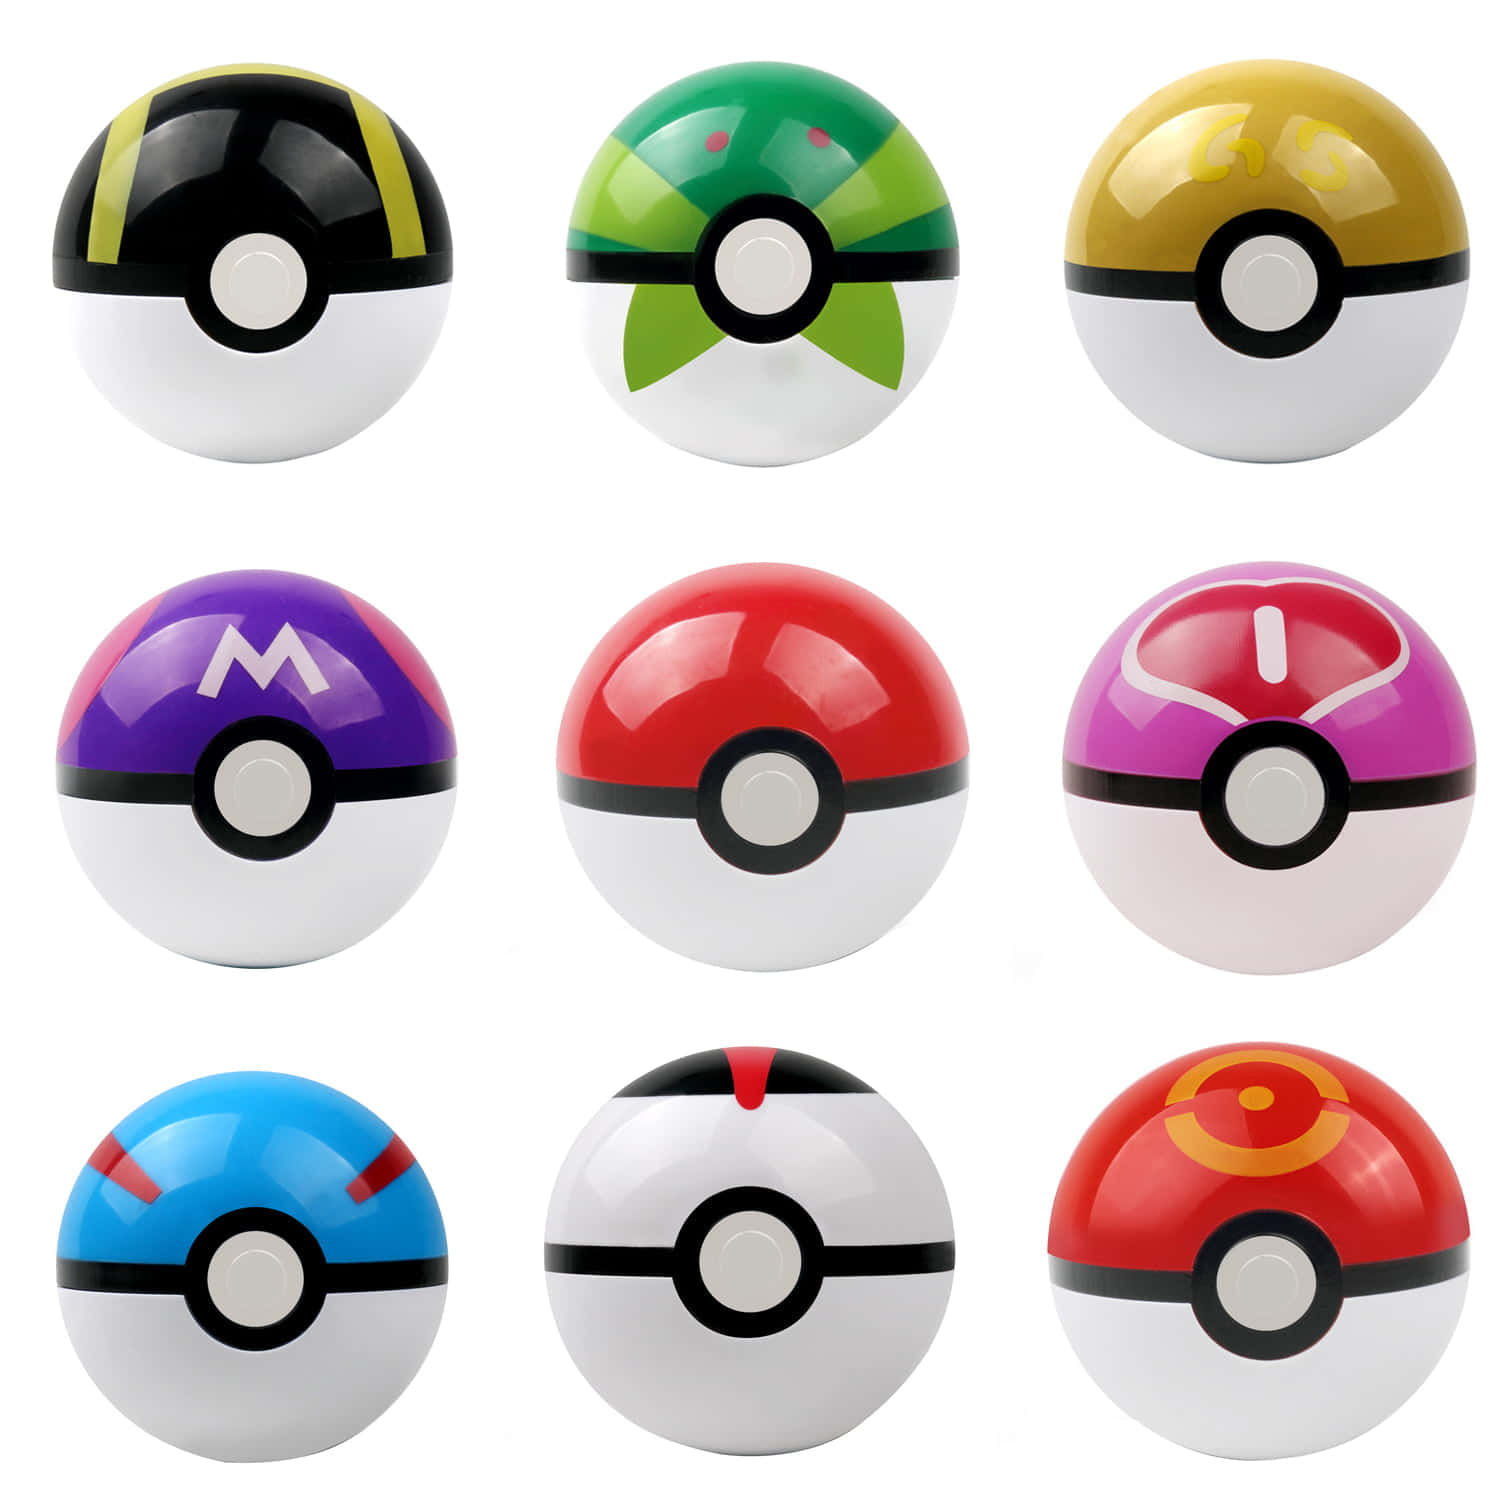 200+] Pokeball Pictures